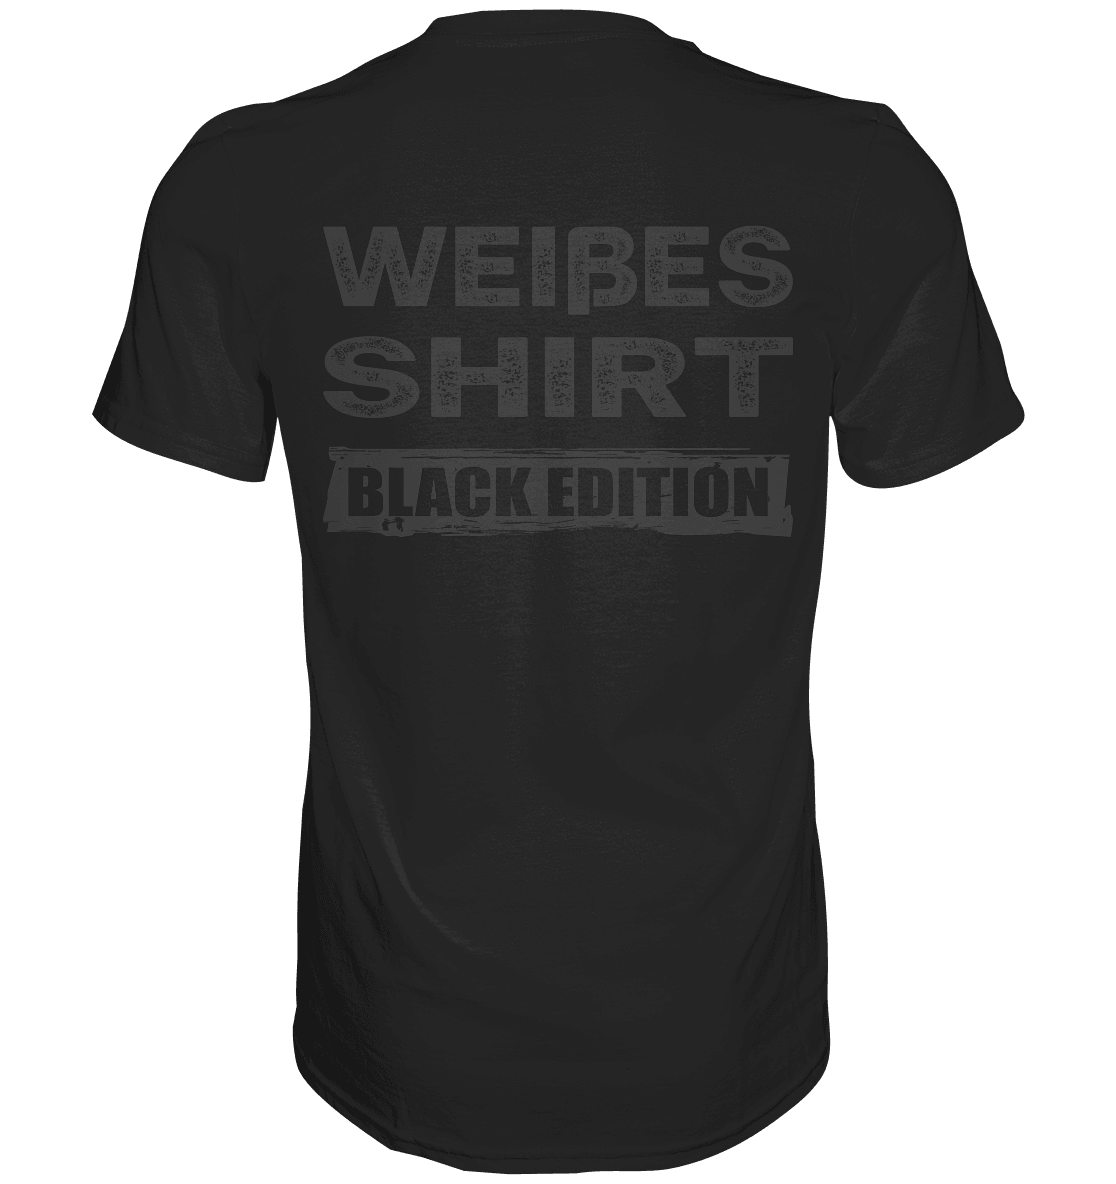 Weißes Shirt - Black Edition - Backprint - Totally Wasted